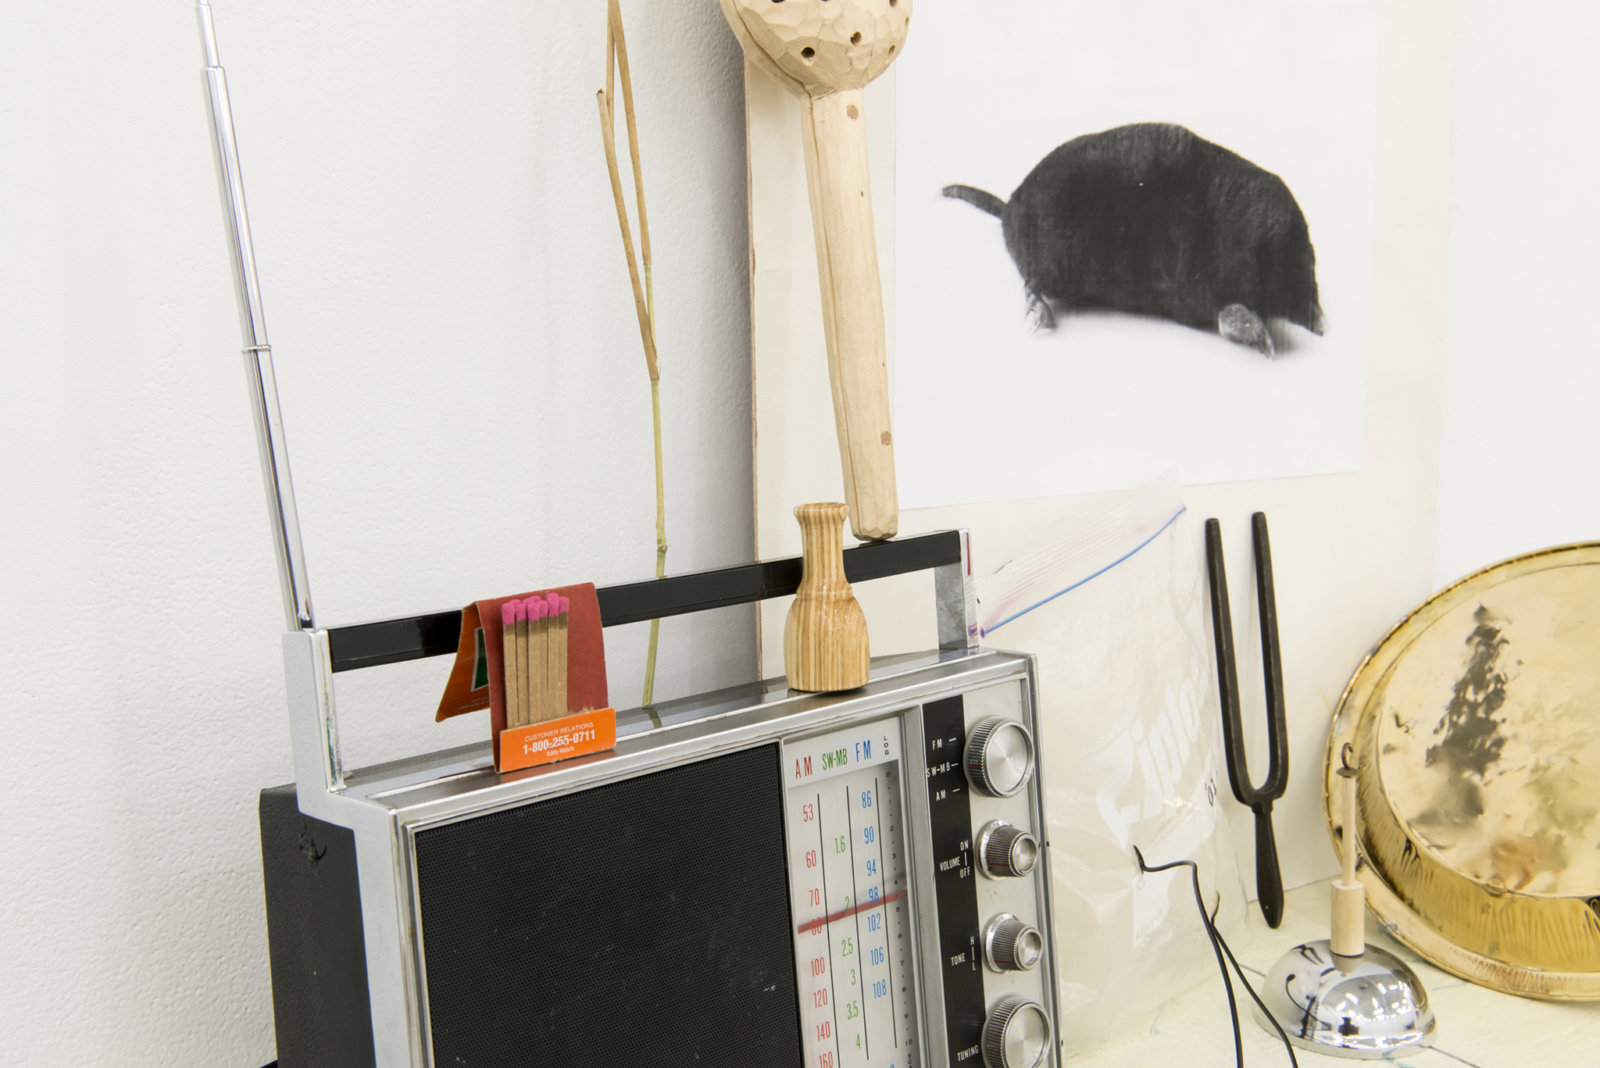 Ashes Withyman, Cetus, Compass, River, Furnas, Musca, Altar, Cup (detail), 2017–2018, radio, matches, animal call, wood and stone rattle, photocopy, grass, usb flash drive, gold plated tin, sand, ziploc bag with contact microphone, tuning fork, dried grass, bell, painted plywood, 52 x 29 x 9 in. (132 x 74 x 23 cm)